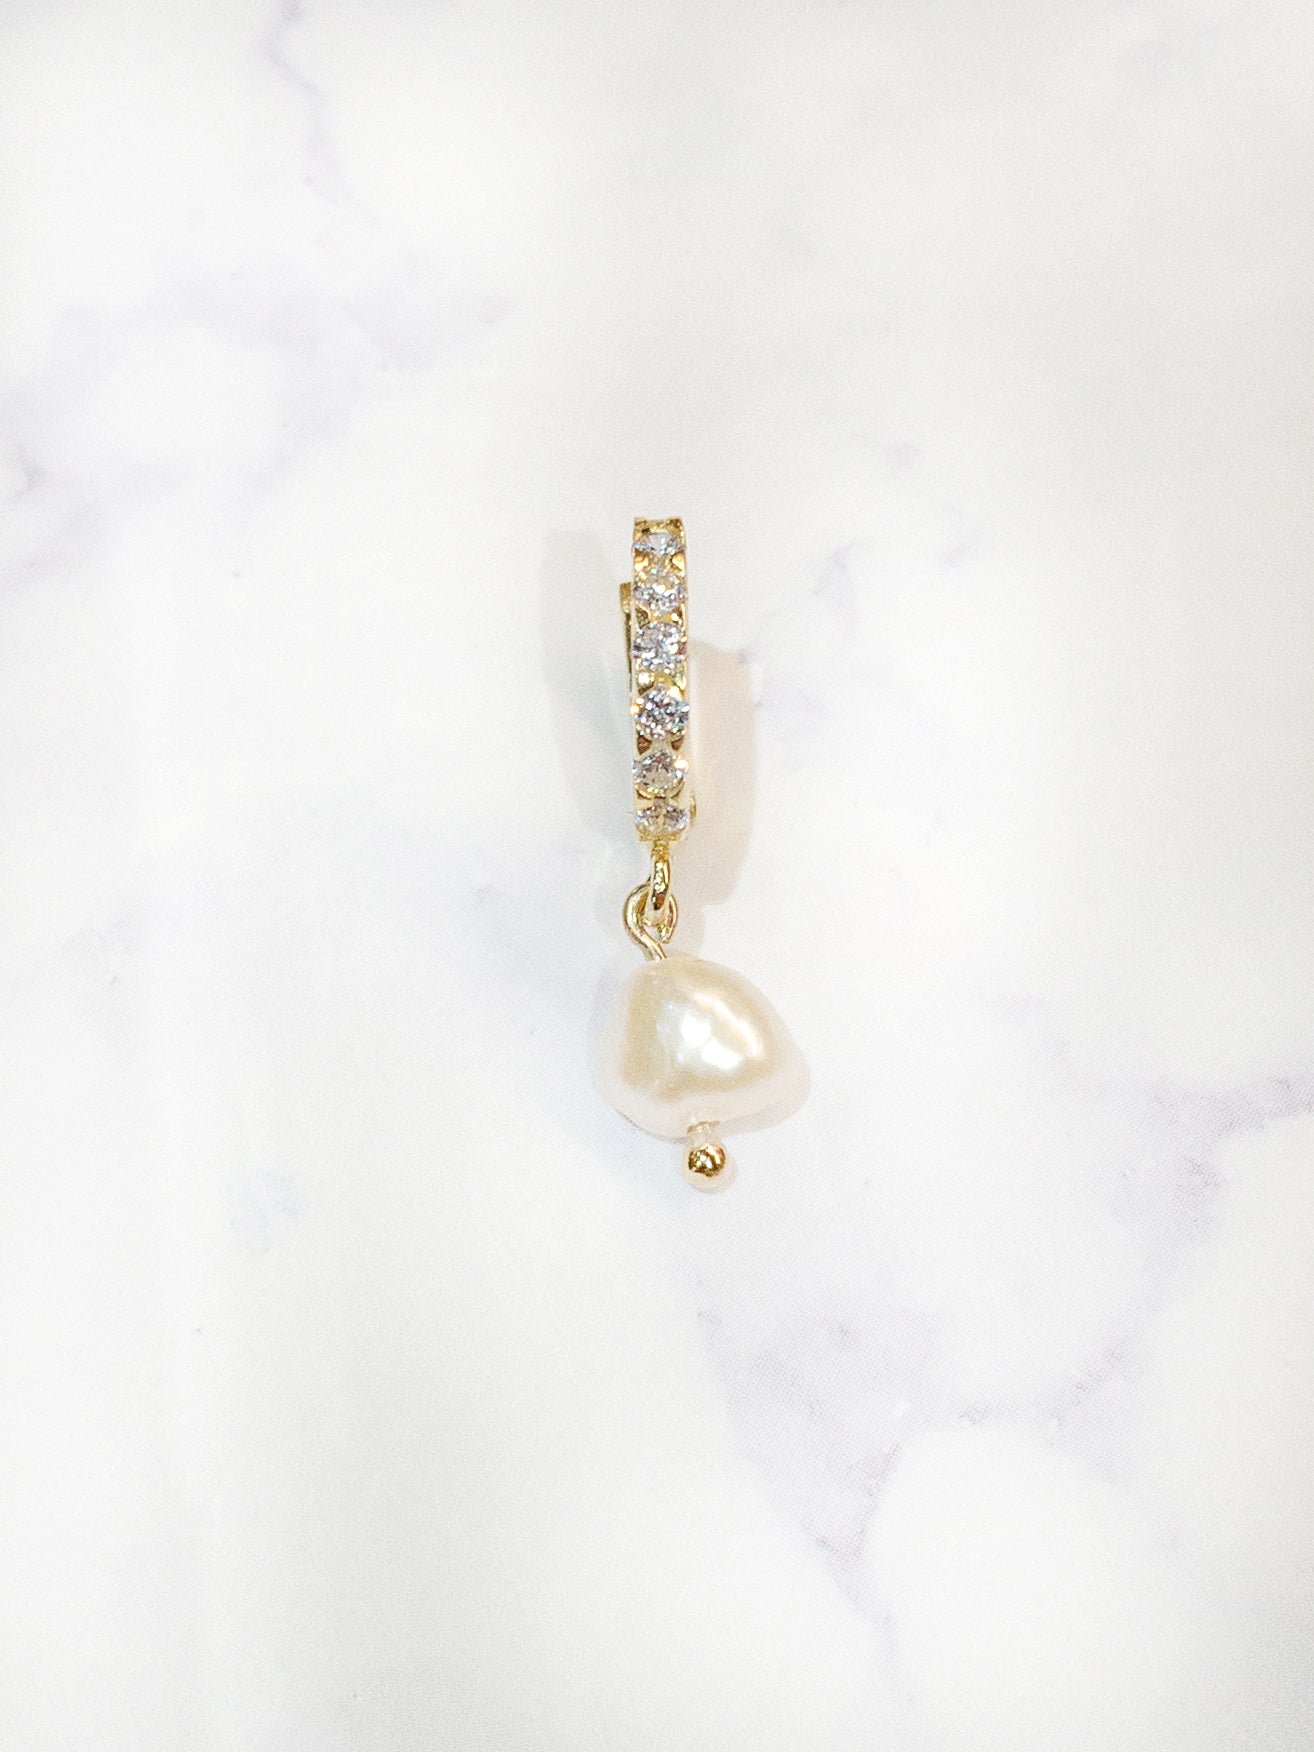 Gold Vermeil Sparkly Mini Hoops with Pearl Charms